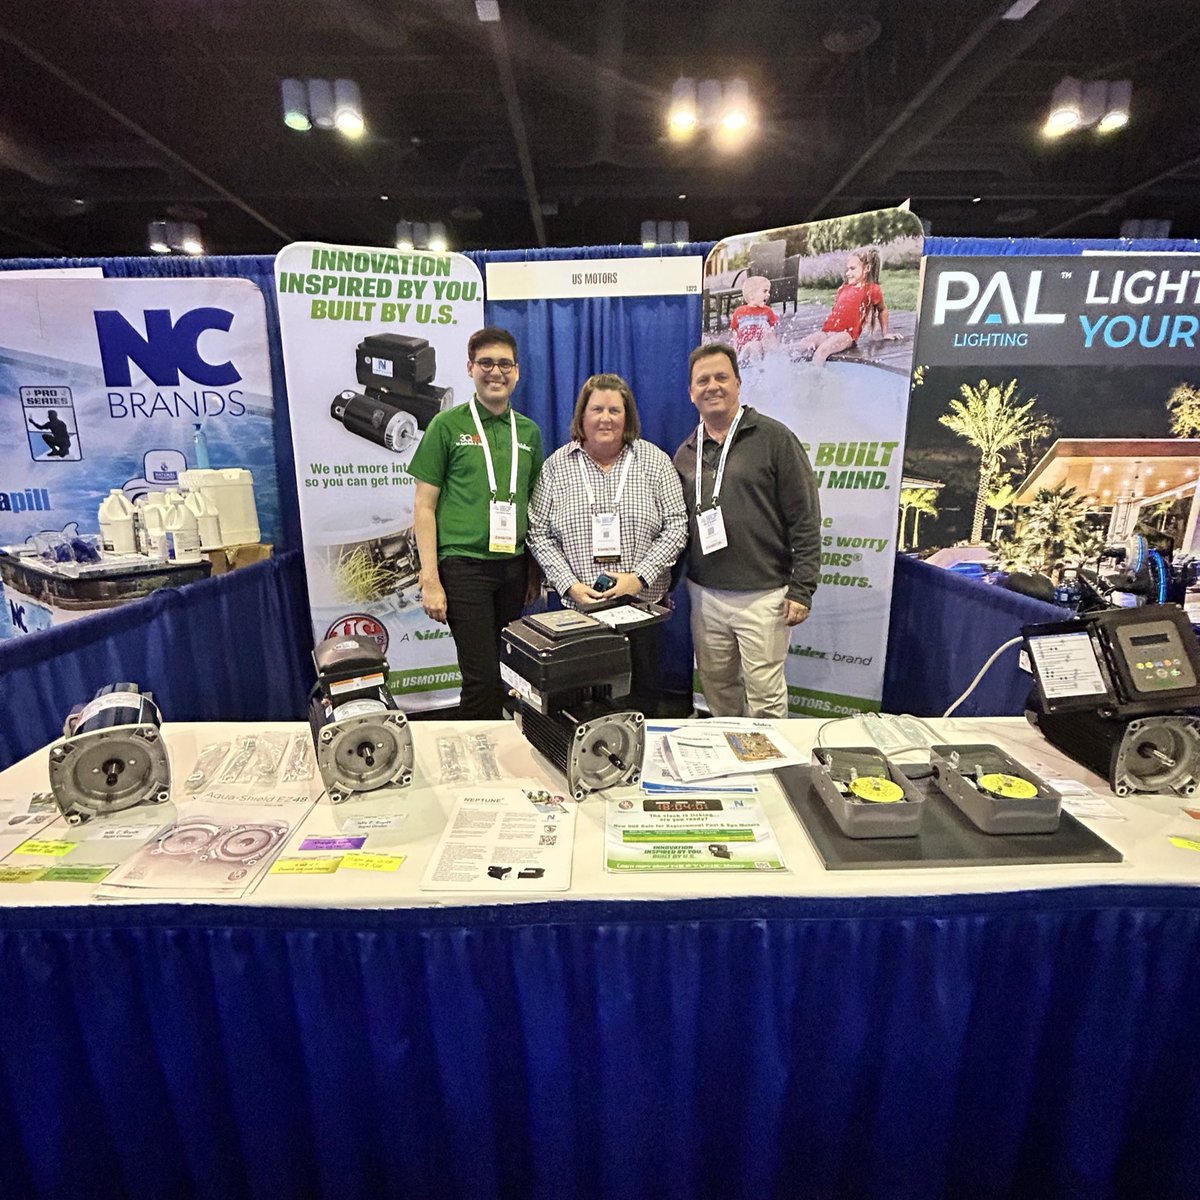 Come join us at the Everything Under the Sun Expo today and tomorrow in Orlando, FL at the Orange County Convention Center. Our team at Booth #1323 is excited to discuss the latest in our pool motor technology!